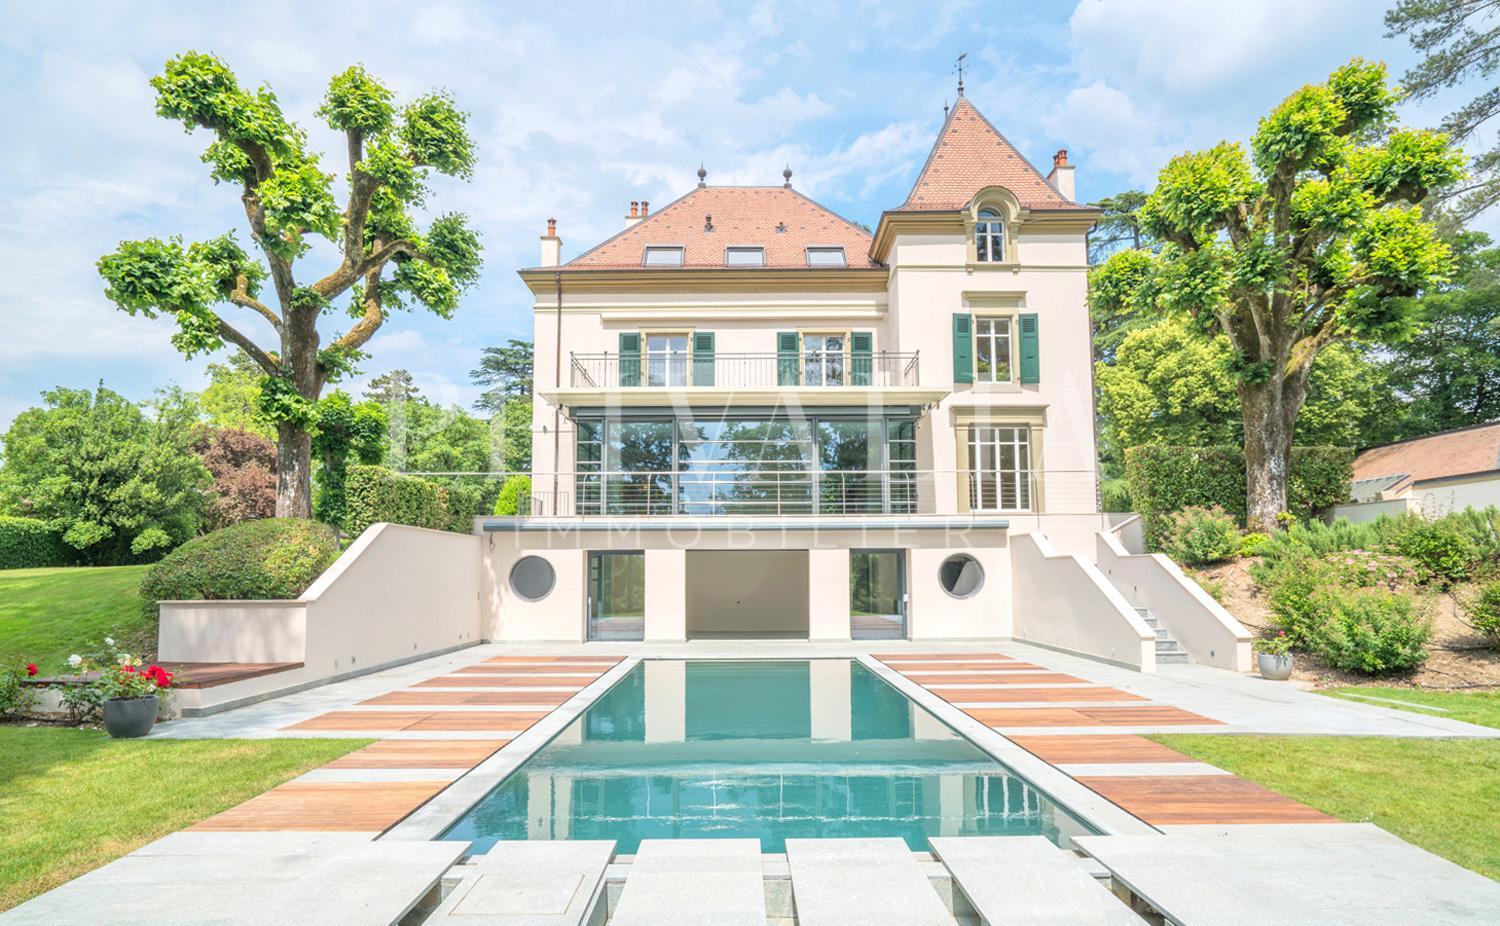 PrivaliaUnique : Splendid residence with swimming pool and independent studio